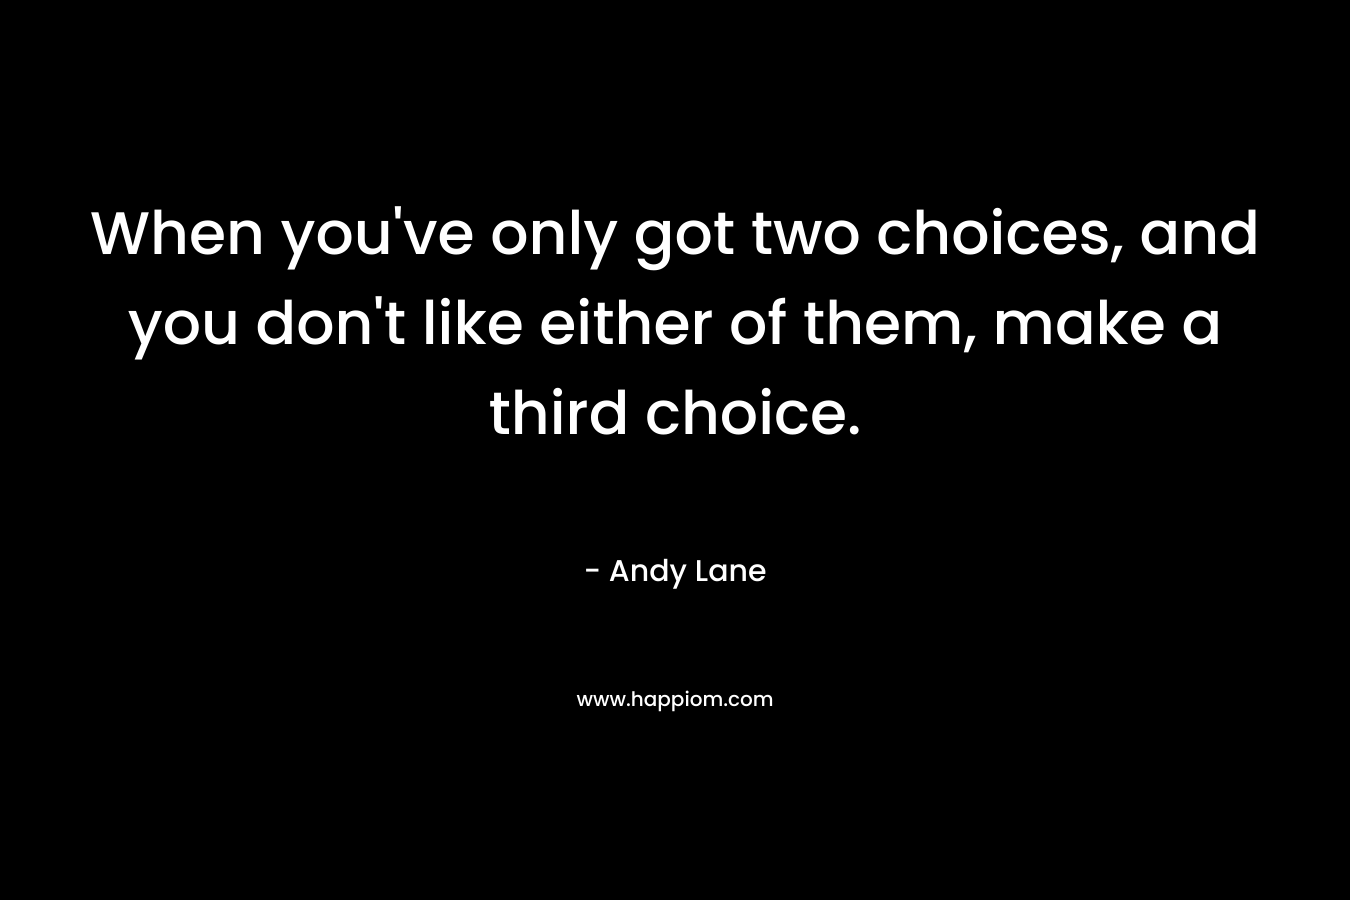 When you've only got two choices, and you don't like either of them, make a third choice.